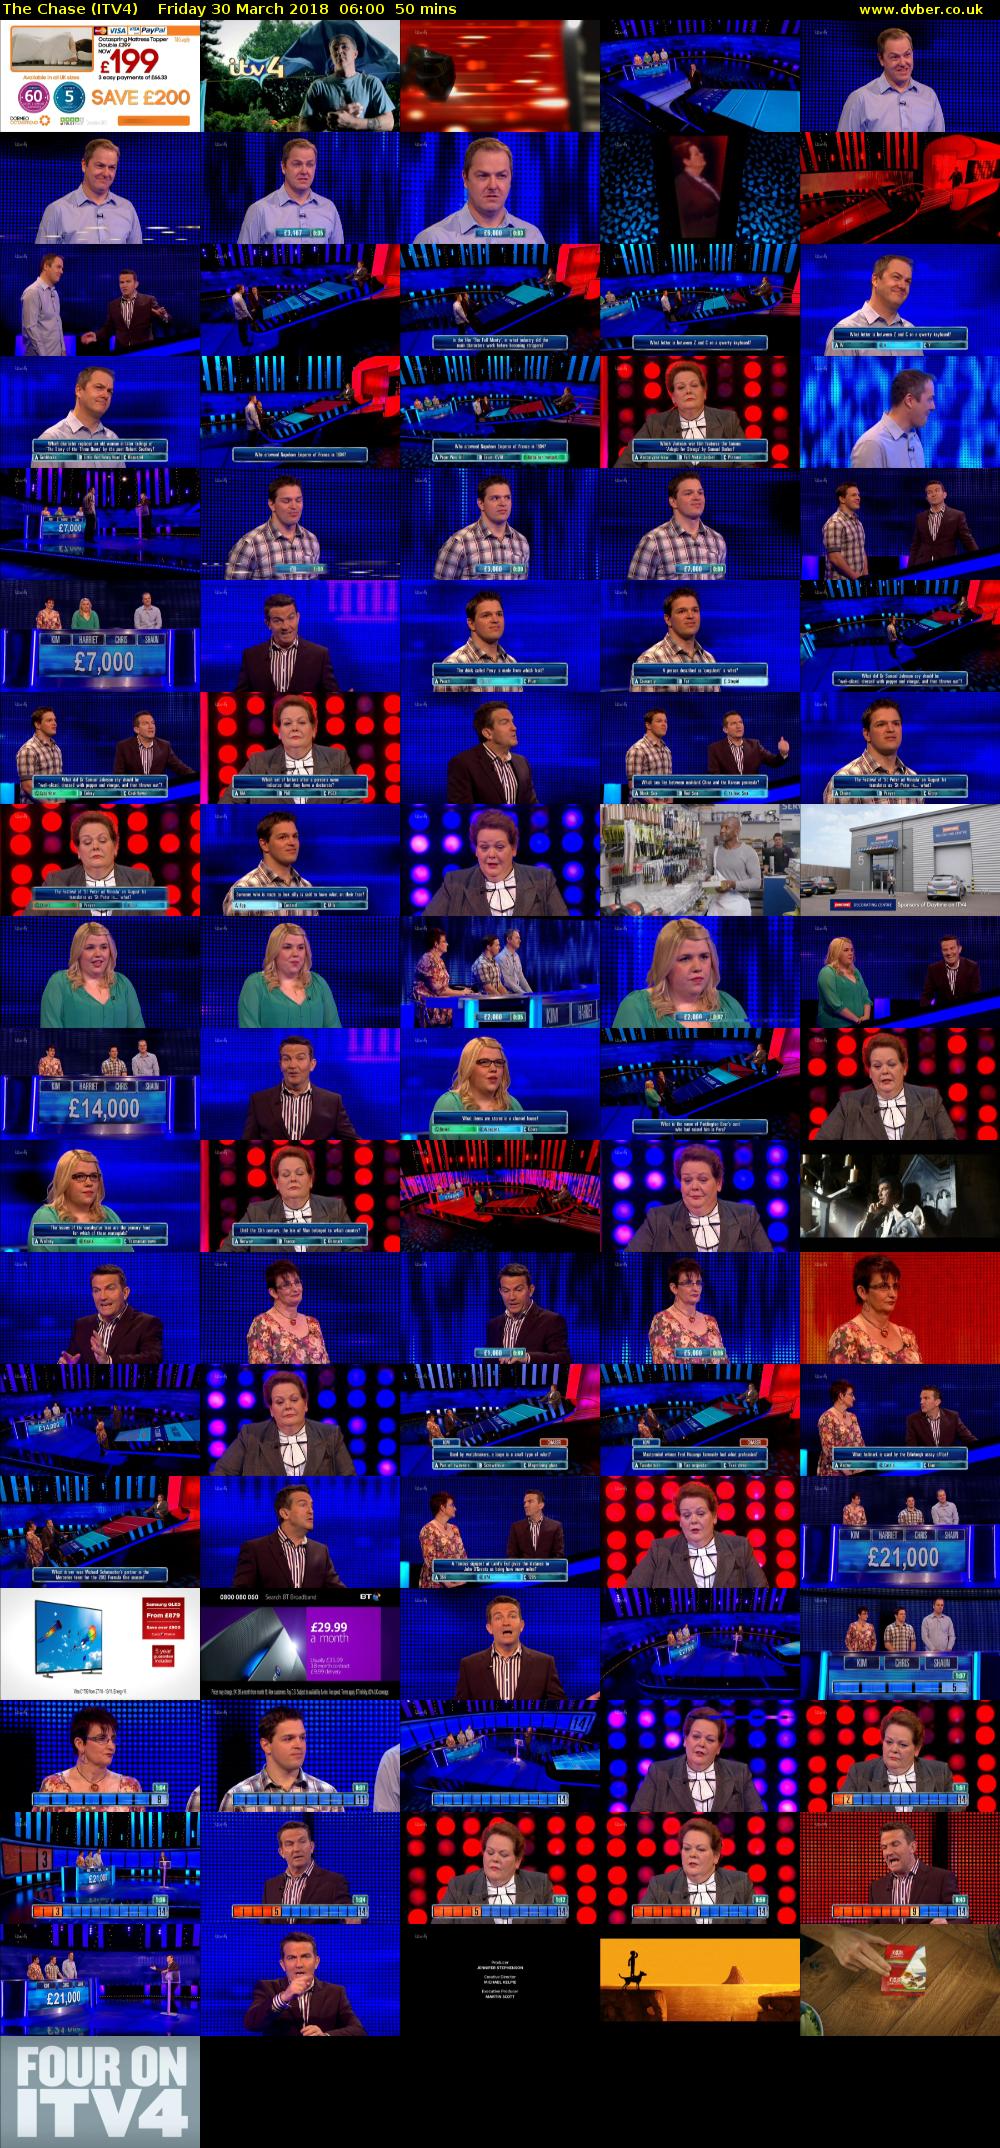 The Chase (ITV4) Friday 30 March 2018 06:00 - 06:50